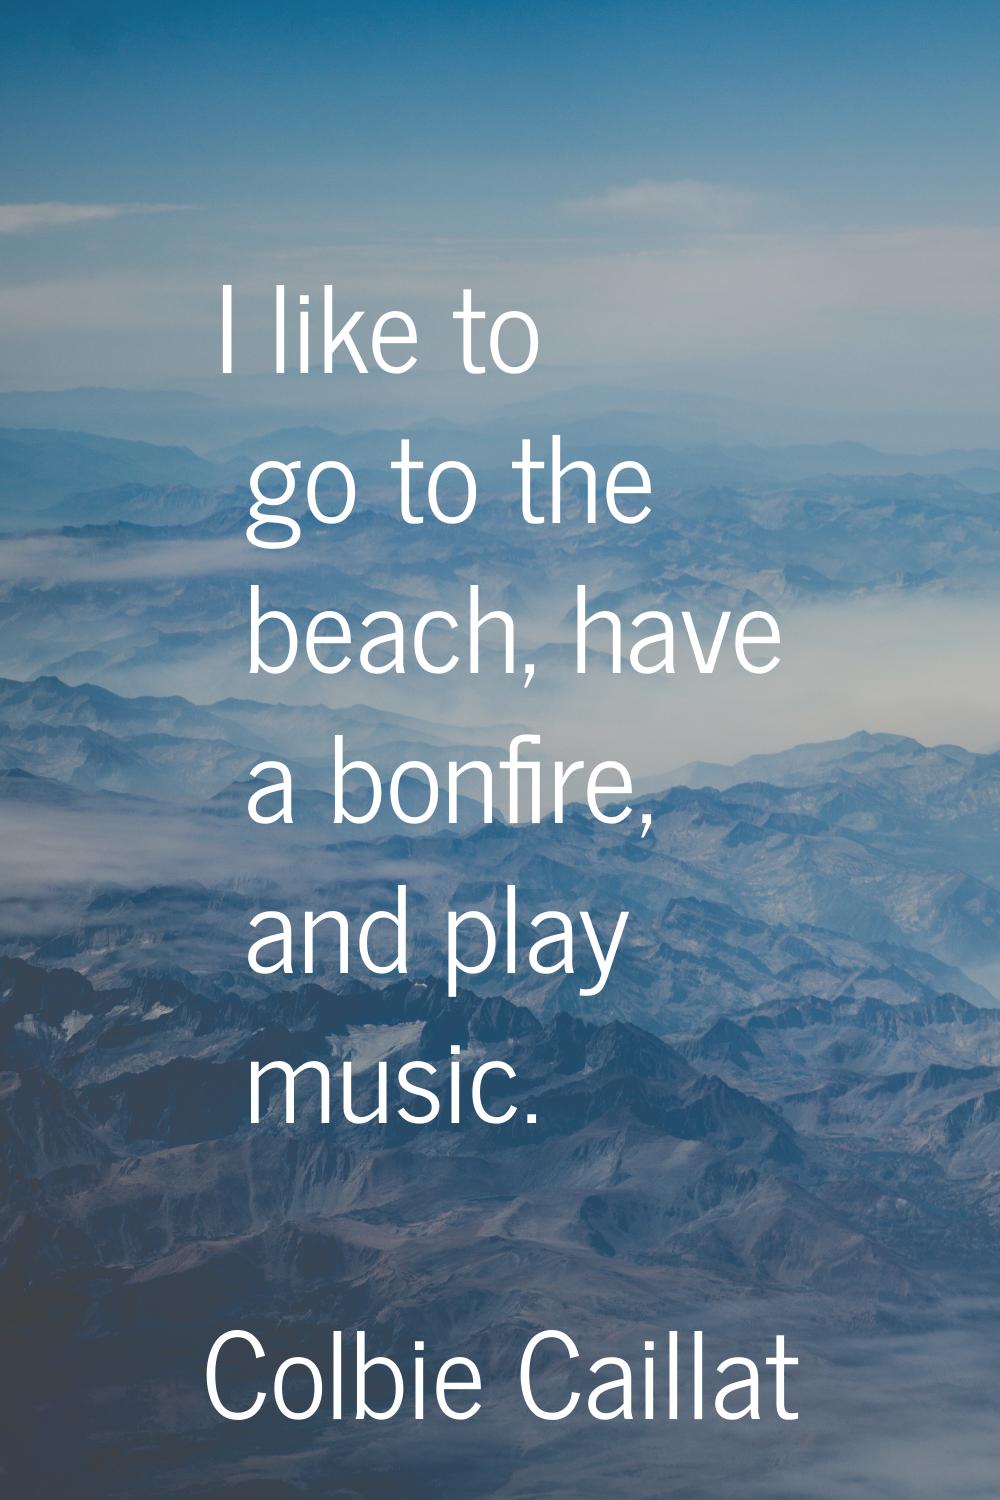 I like to go to the beach, have a bonfire, and play music.